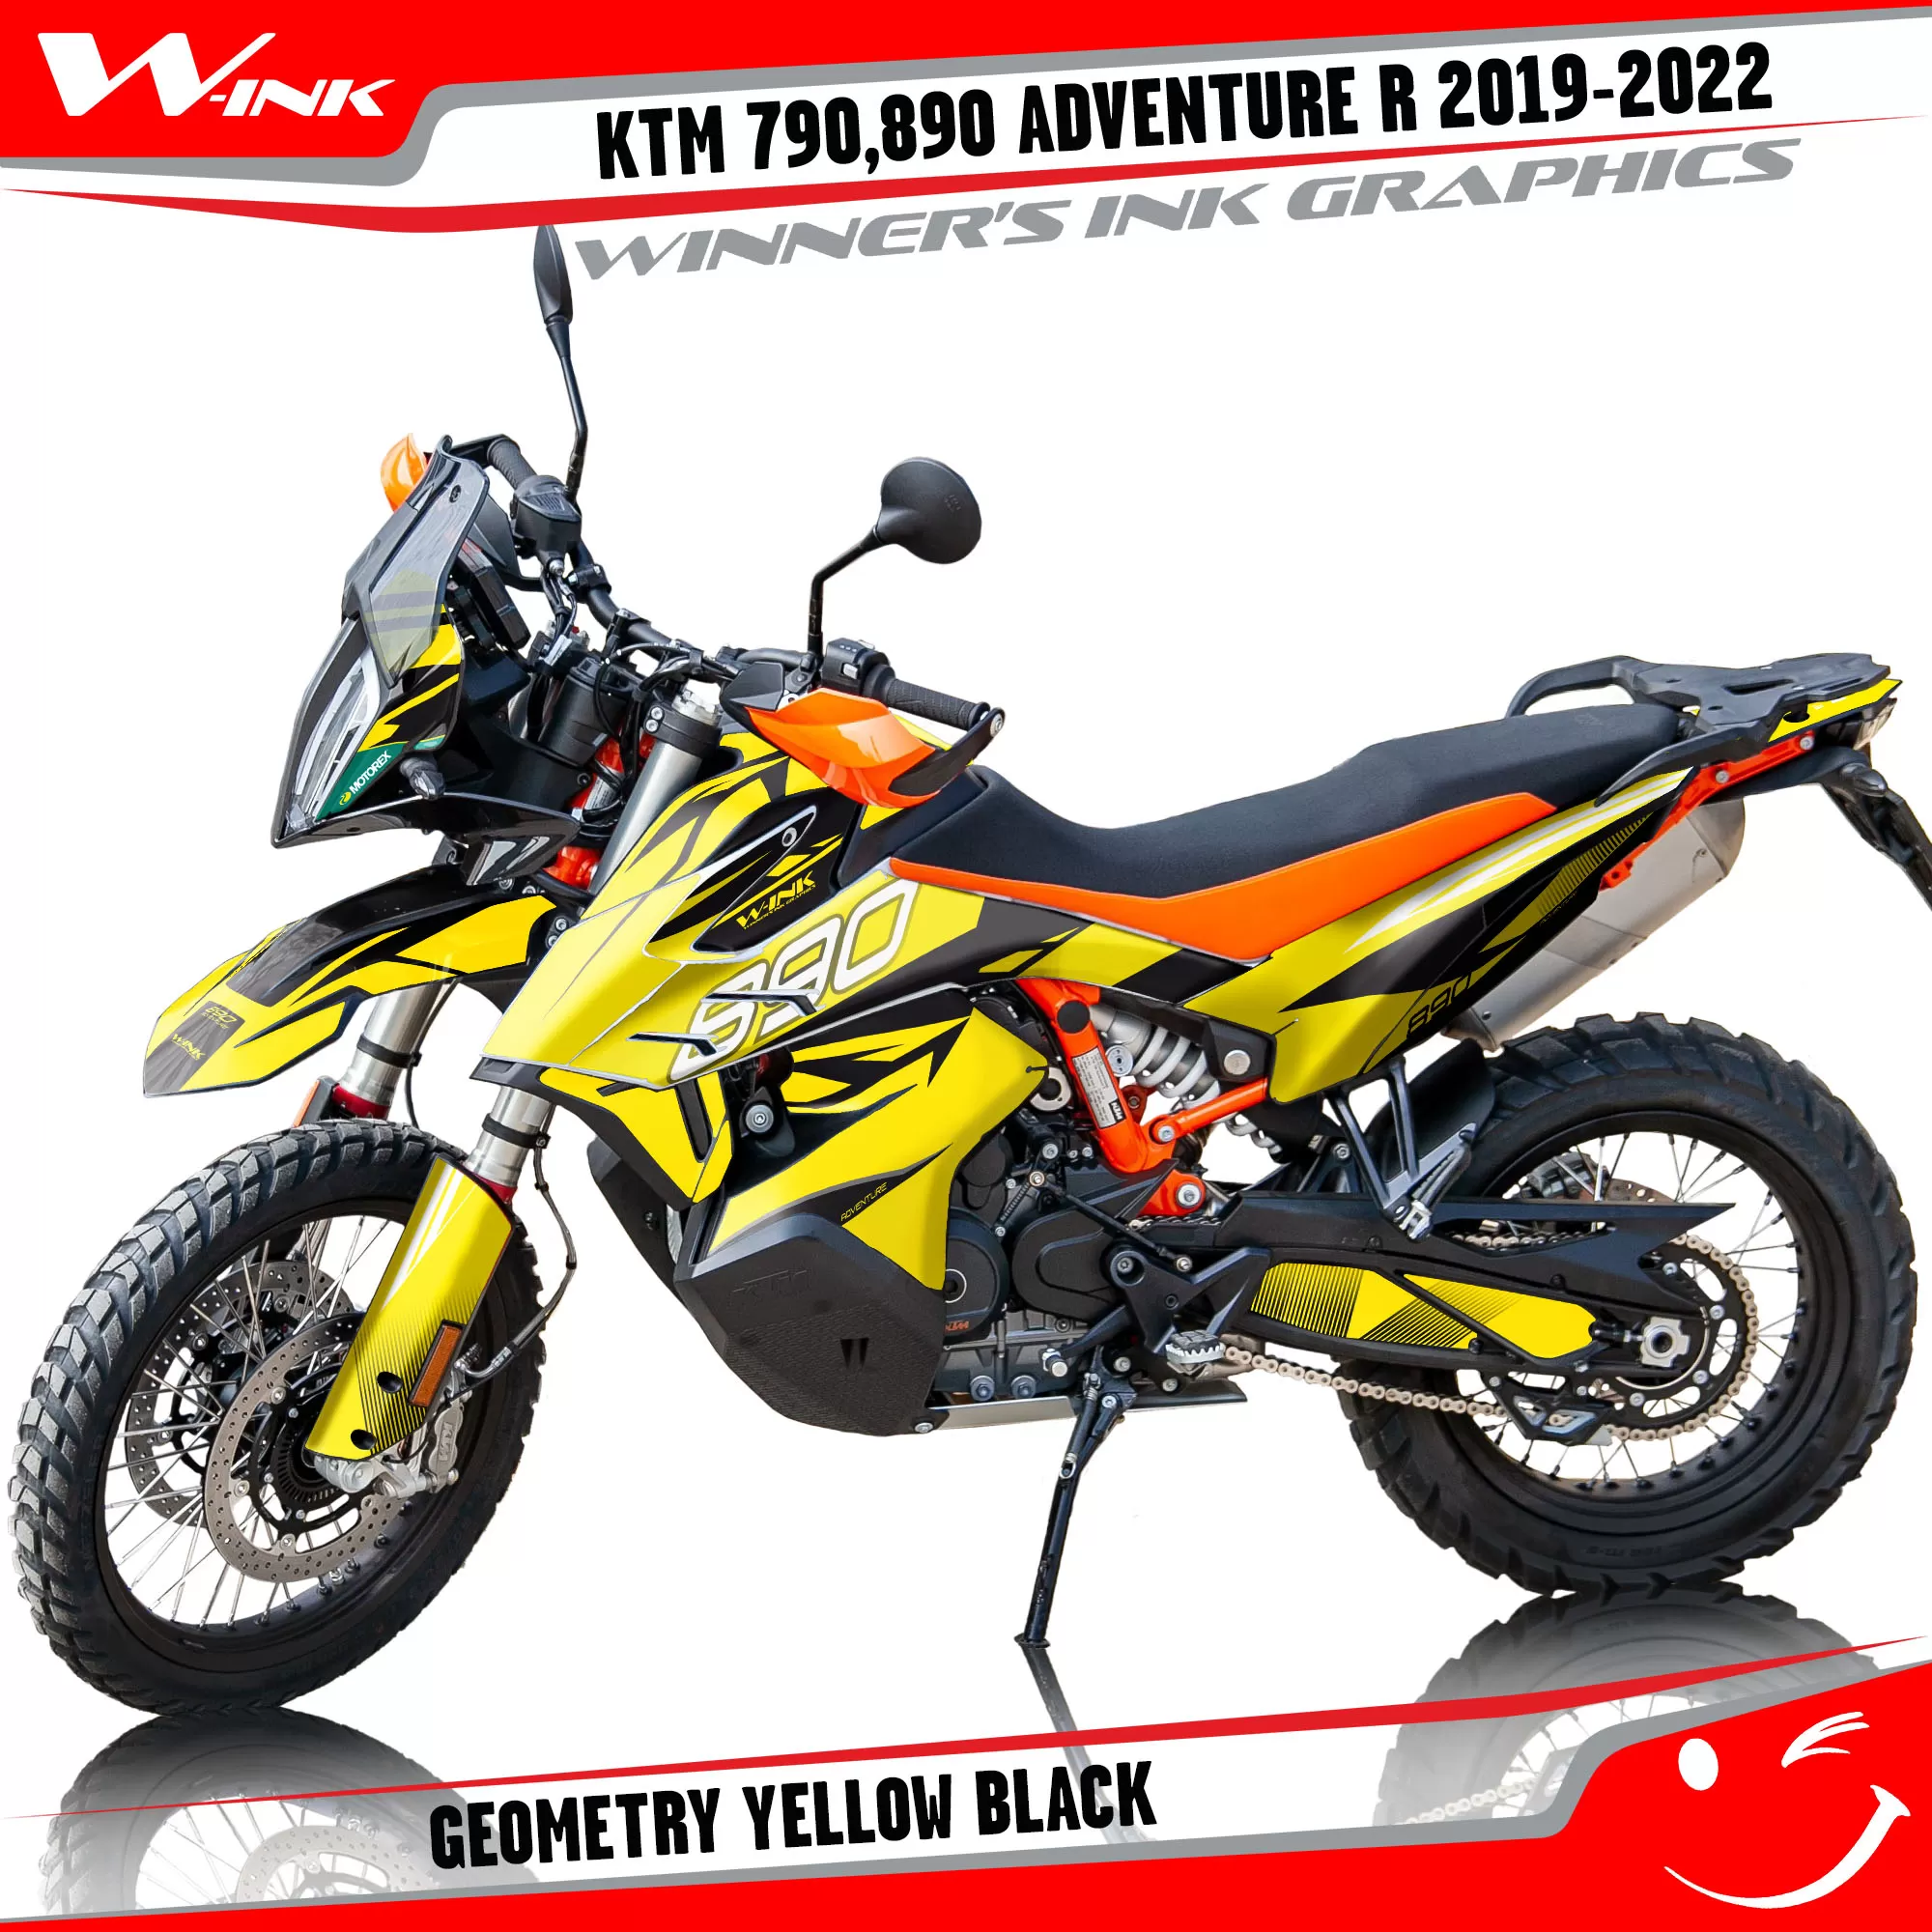 Adventure-R-790-890-2019-2020-2021-2022-graphics-kit-and-decals-with-designs-Geometry-Yellow-Black